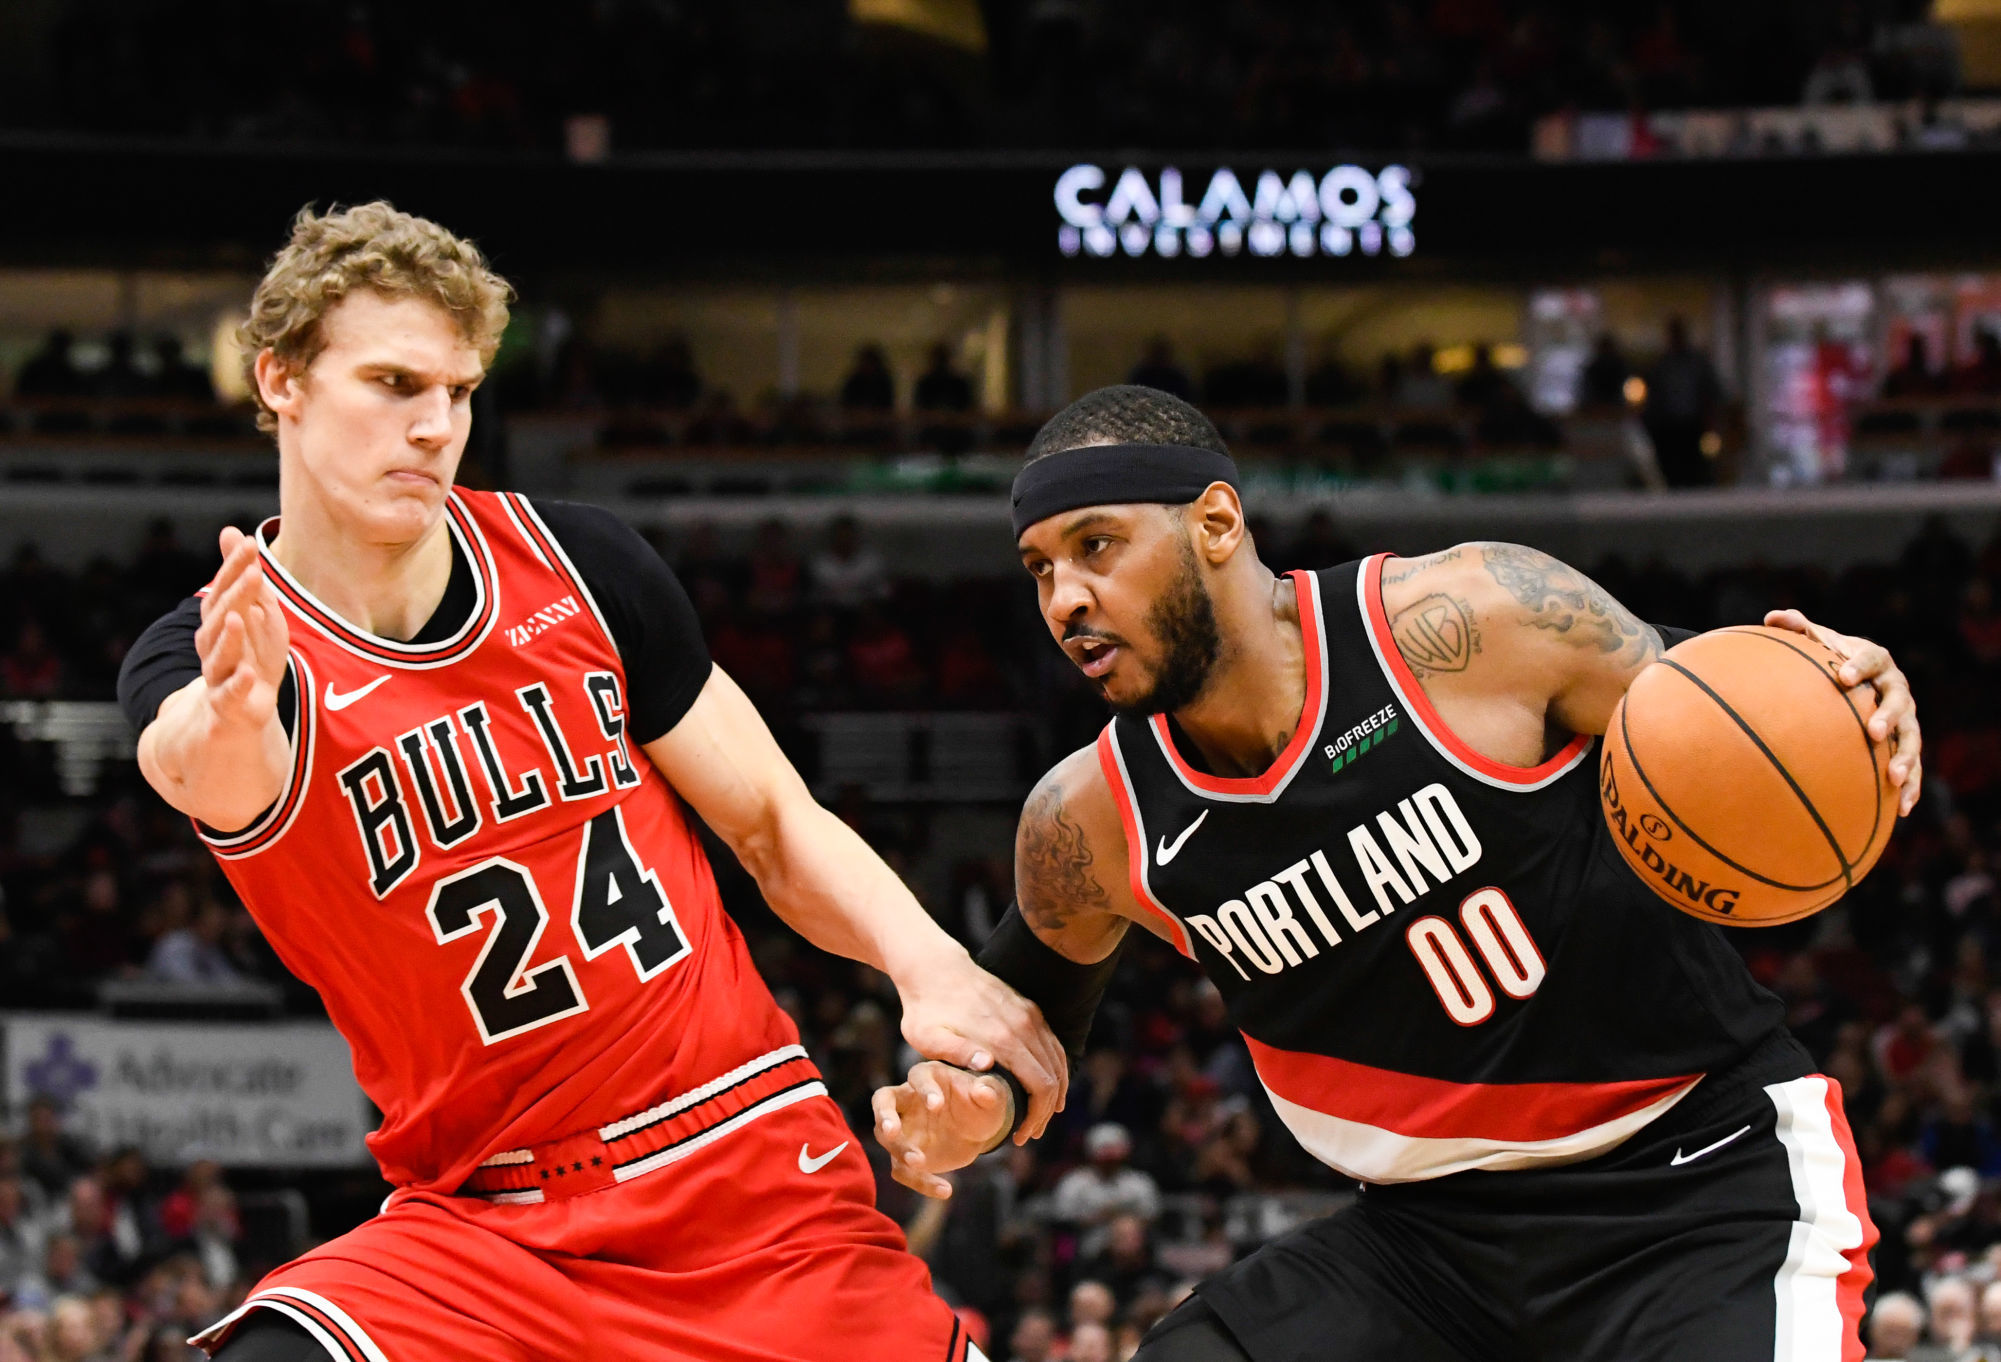 Nov 25, 2019; Chicago, IL, USA; Portland Trail Blazers forward Carmelo Anthony (00) drives on Chicago Bulls forward Lauri Markkanen (24) during the second half at United Center. Mandatory Credit: David Banks-USA TODAY Sports/Sipa USA 

Photo by Icon Sport - Lauri MARKKANEN - Carmelo ANTHONY - United Center - Chicago (Etats Unis)